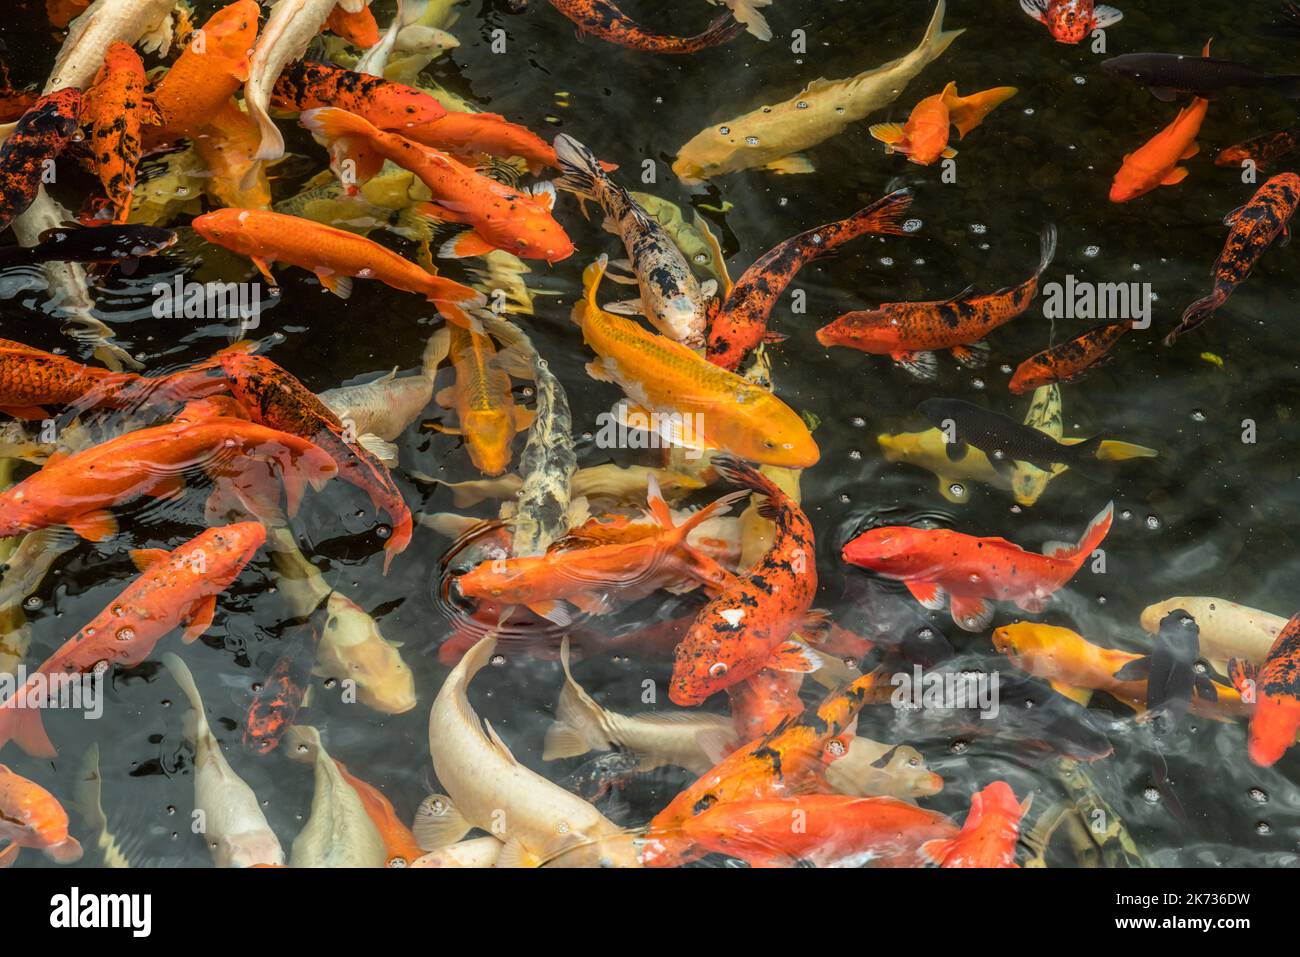 Lot of colorful asian carps swimming in the water. Stock Photo